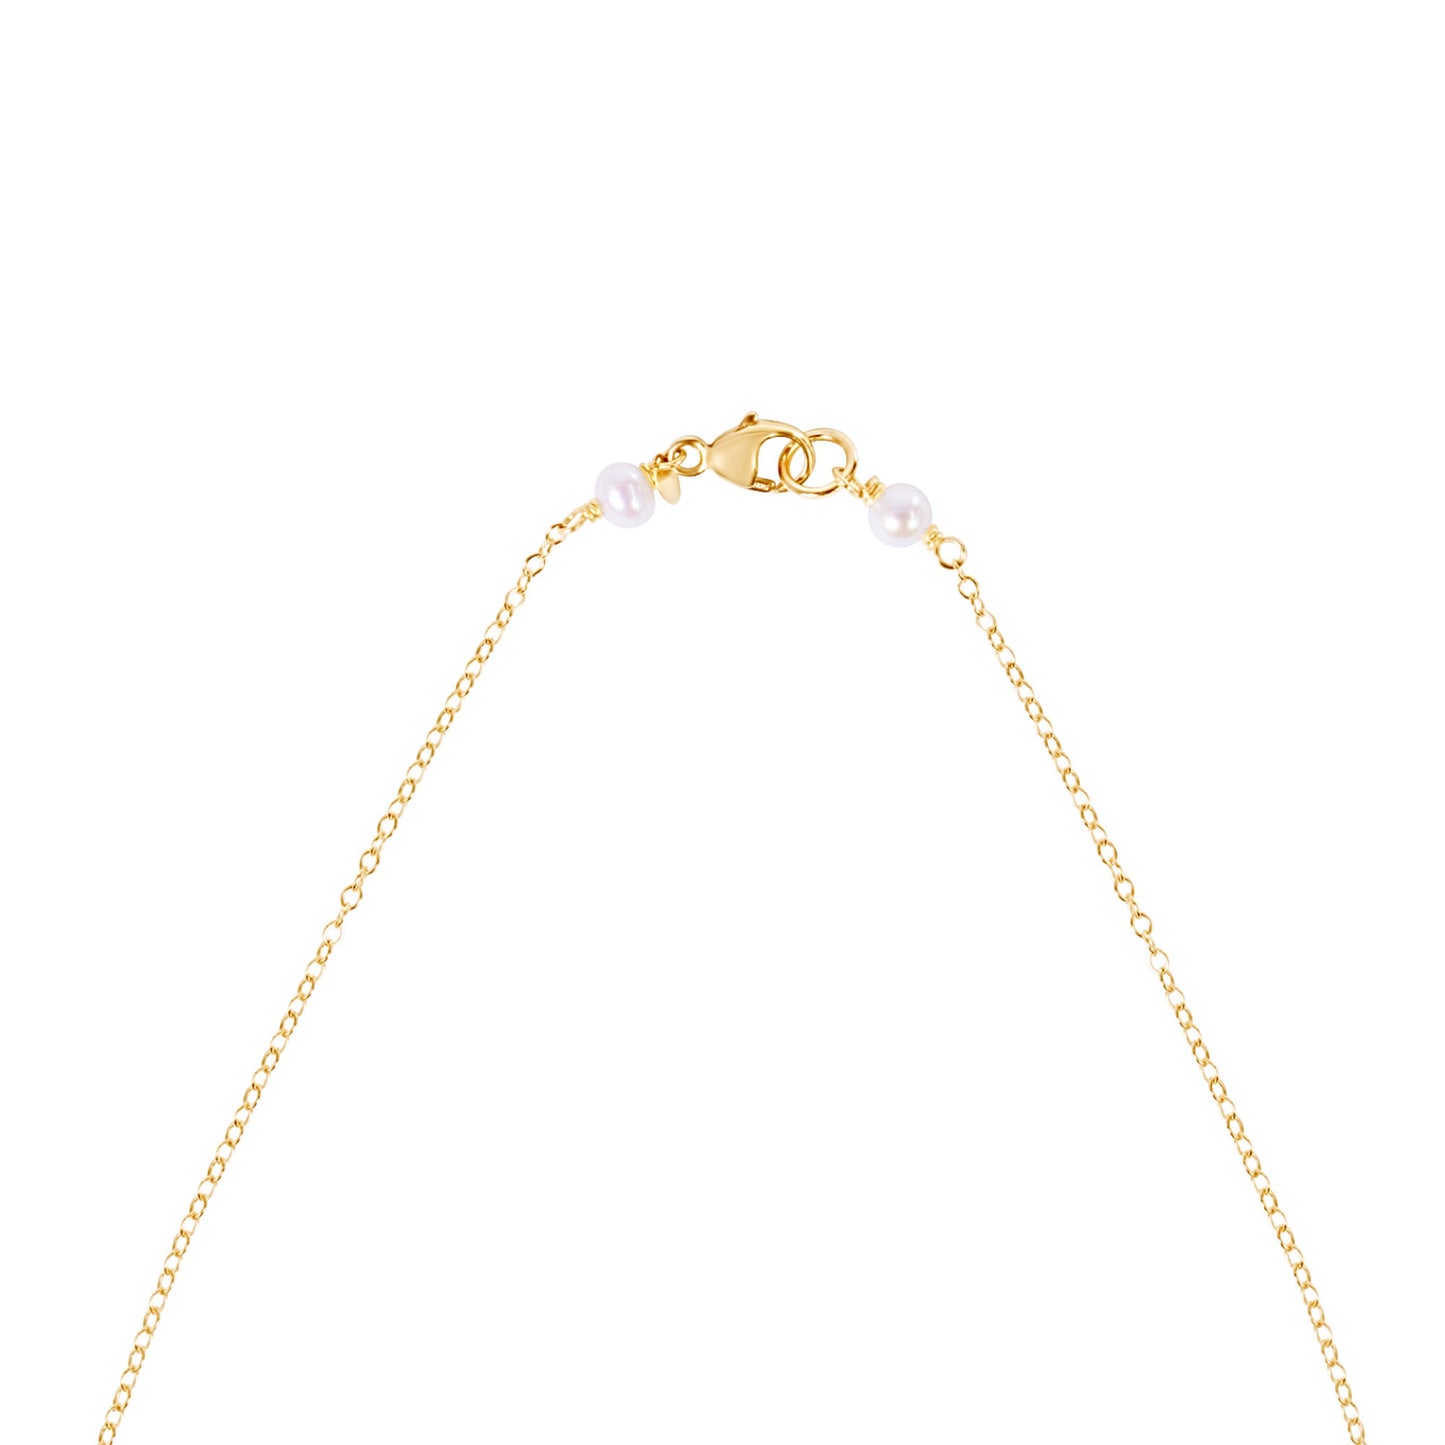 14k Yellow Gold White Pearl Grad Bead Station Necklace 17